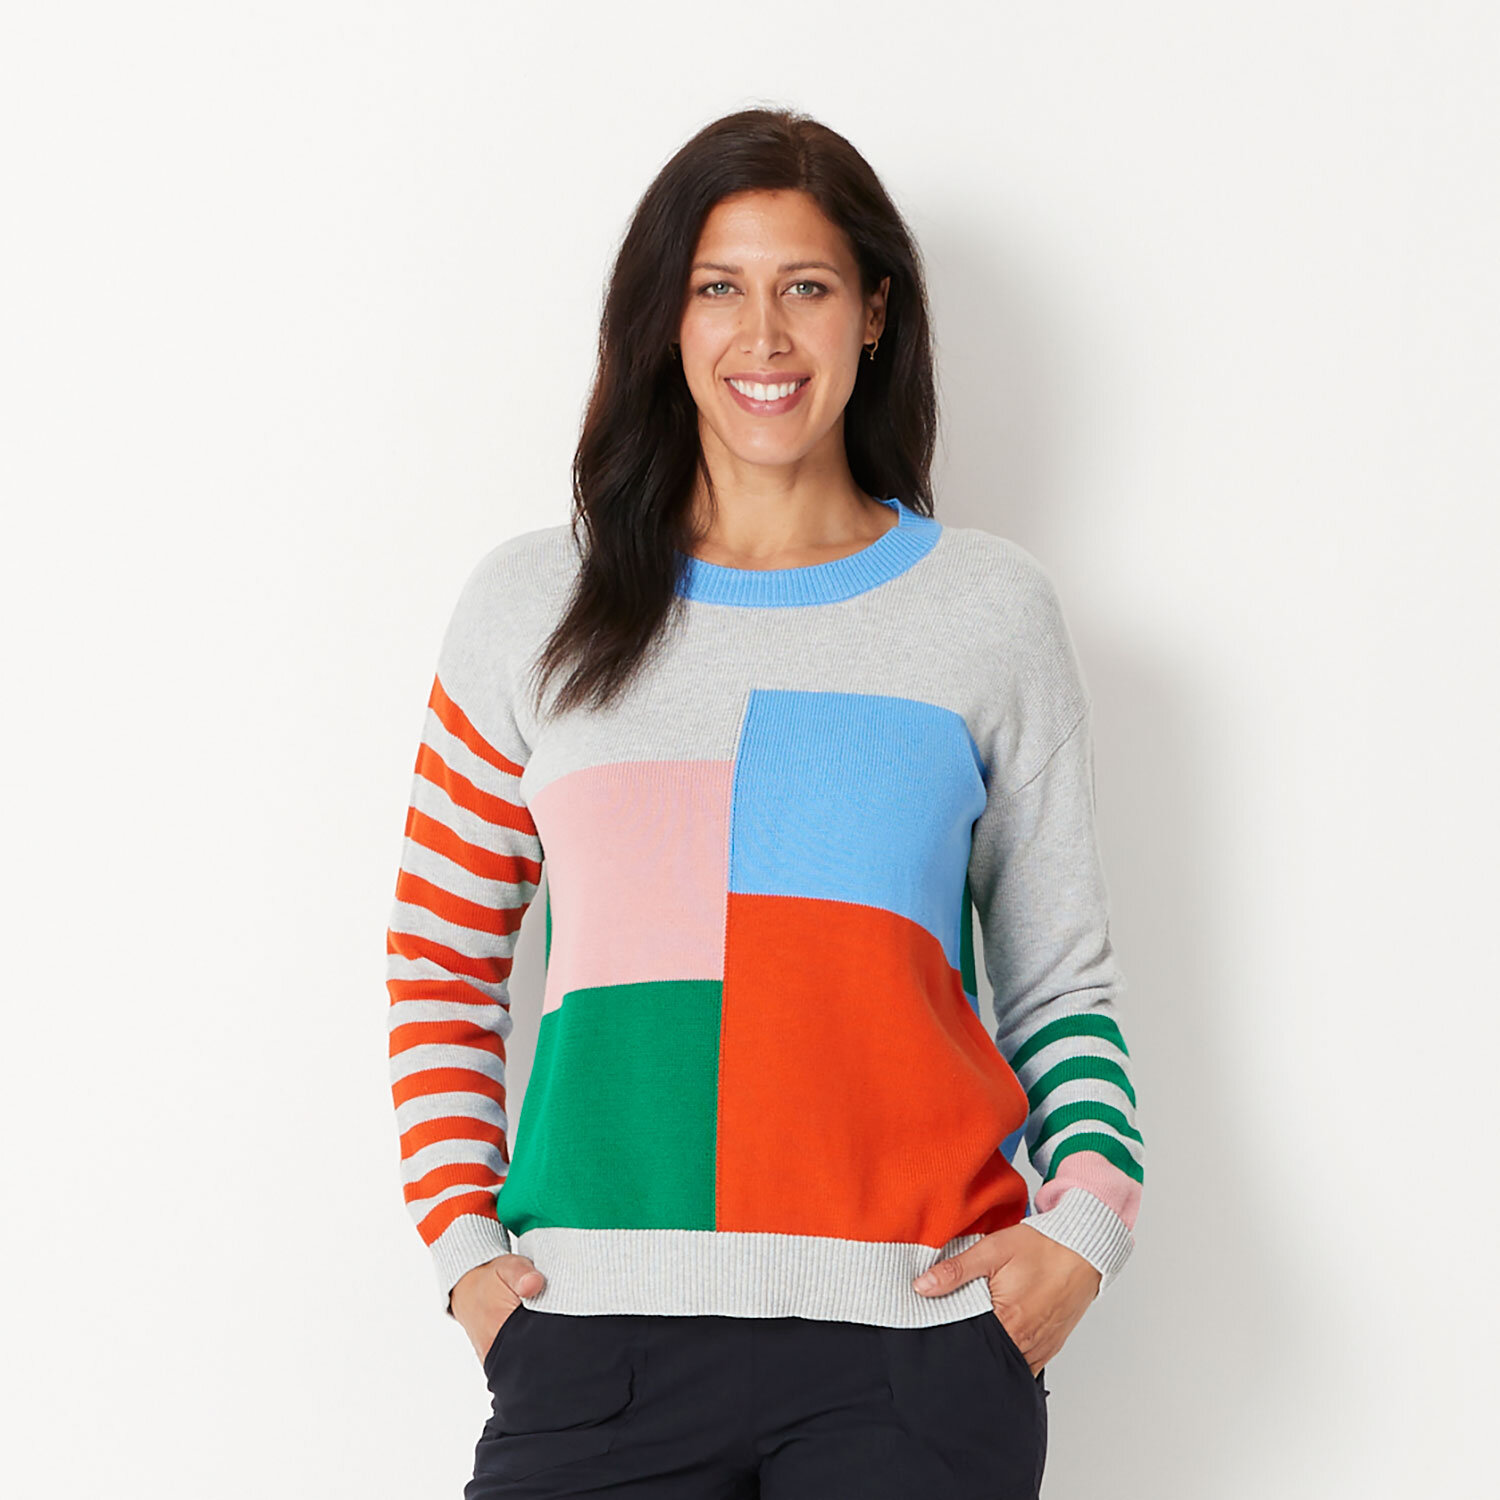 Nothing like a pop of colour.  This jumper is so much fun and it is 100% cotton.  Very wearable.  Available in store and online now.

https://bit.ly/3TEhWSL

#shoplocal #cottonknitwear #foreverywoman